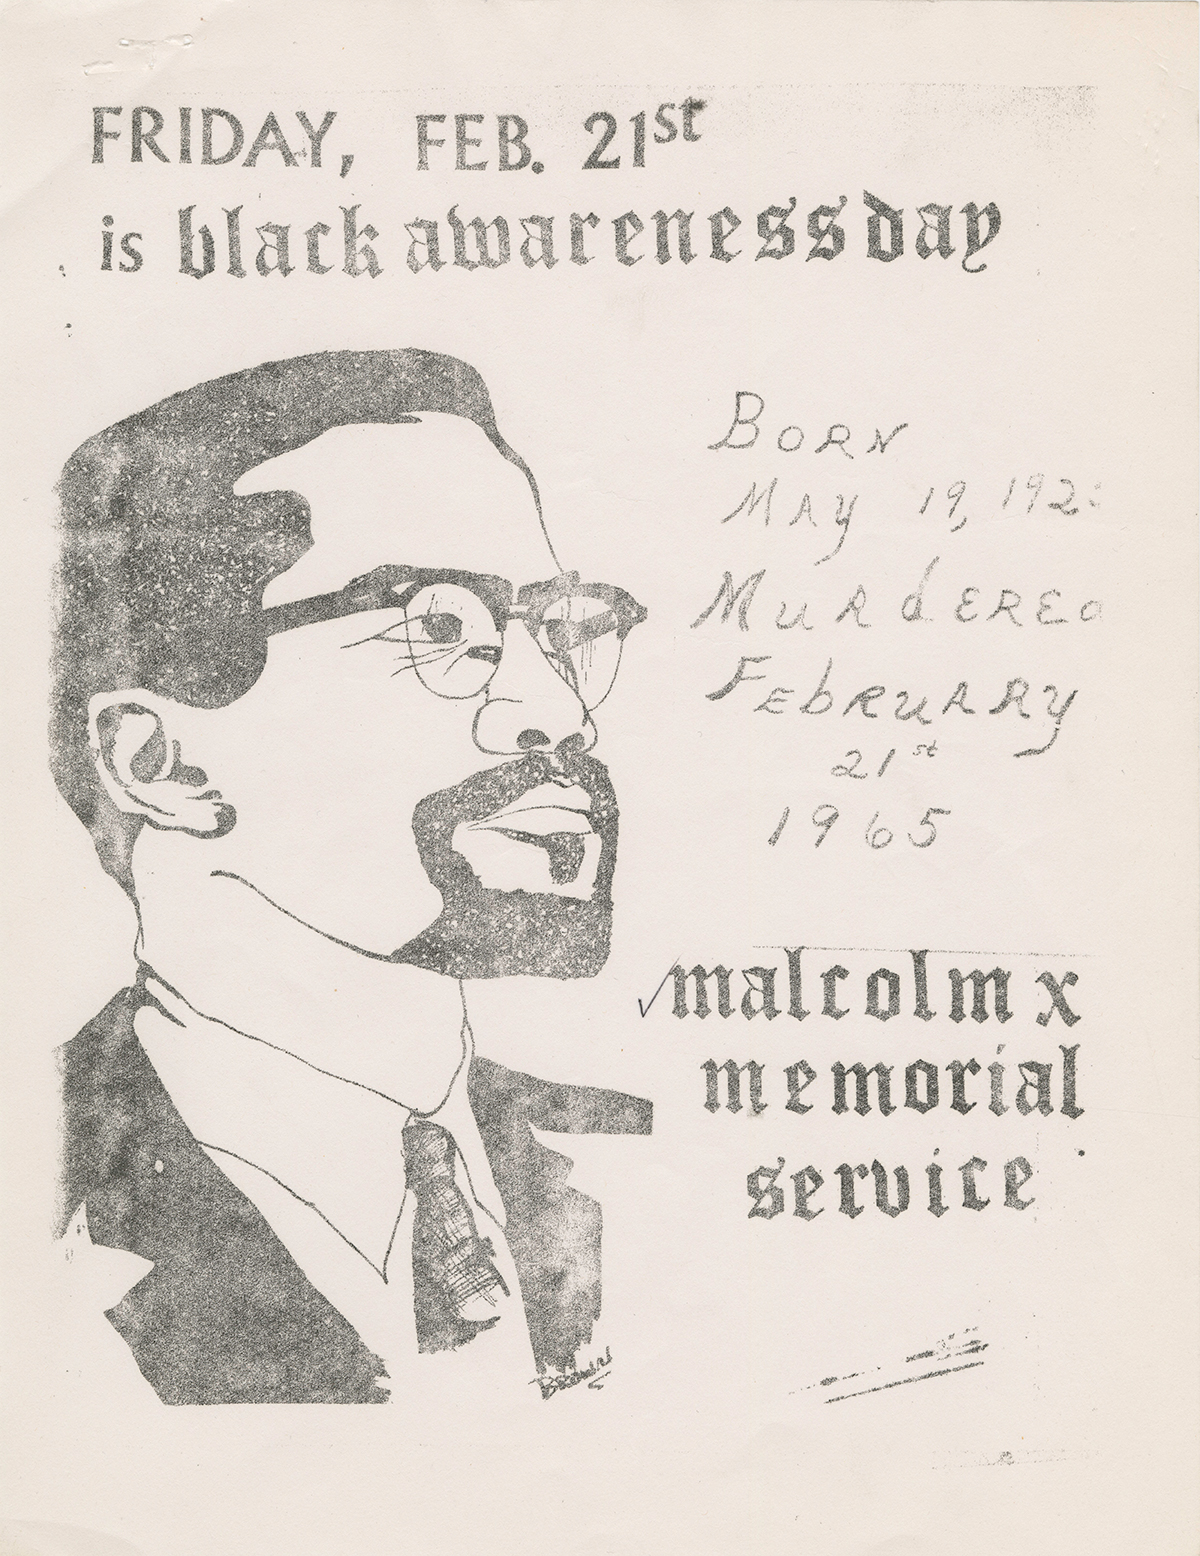 Flyer with a portrait of Malcolm X. Friday, Feb. 21st is Black Awareness day. Born May 19, 1925. Murdered February 21st, 1965. Malcolm X Memorial Service